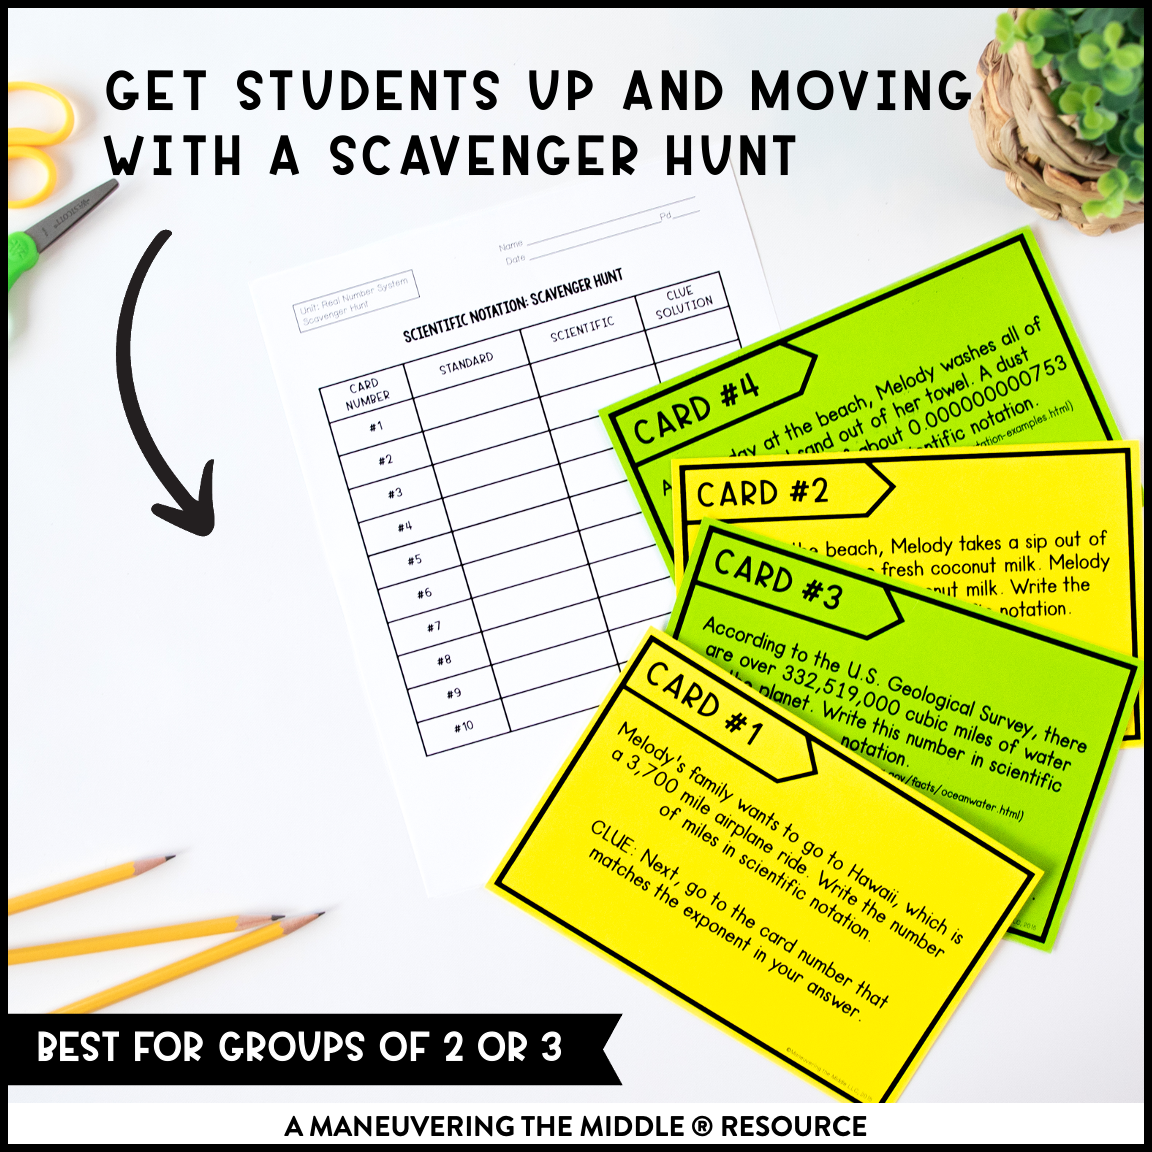 This Exponents & Scientific Notation Activity Bundle for 8th Grade includes 6 classroom activities to support students’ knowledge of these skills.